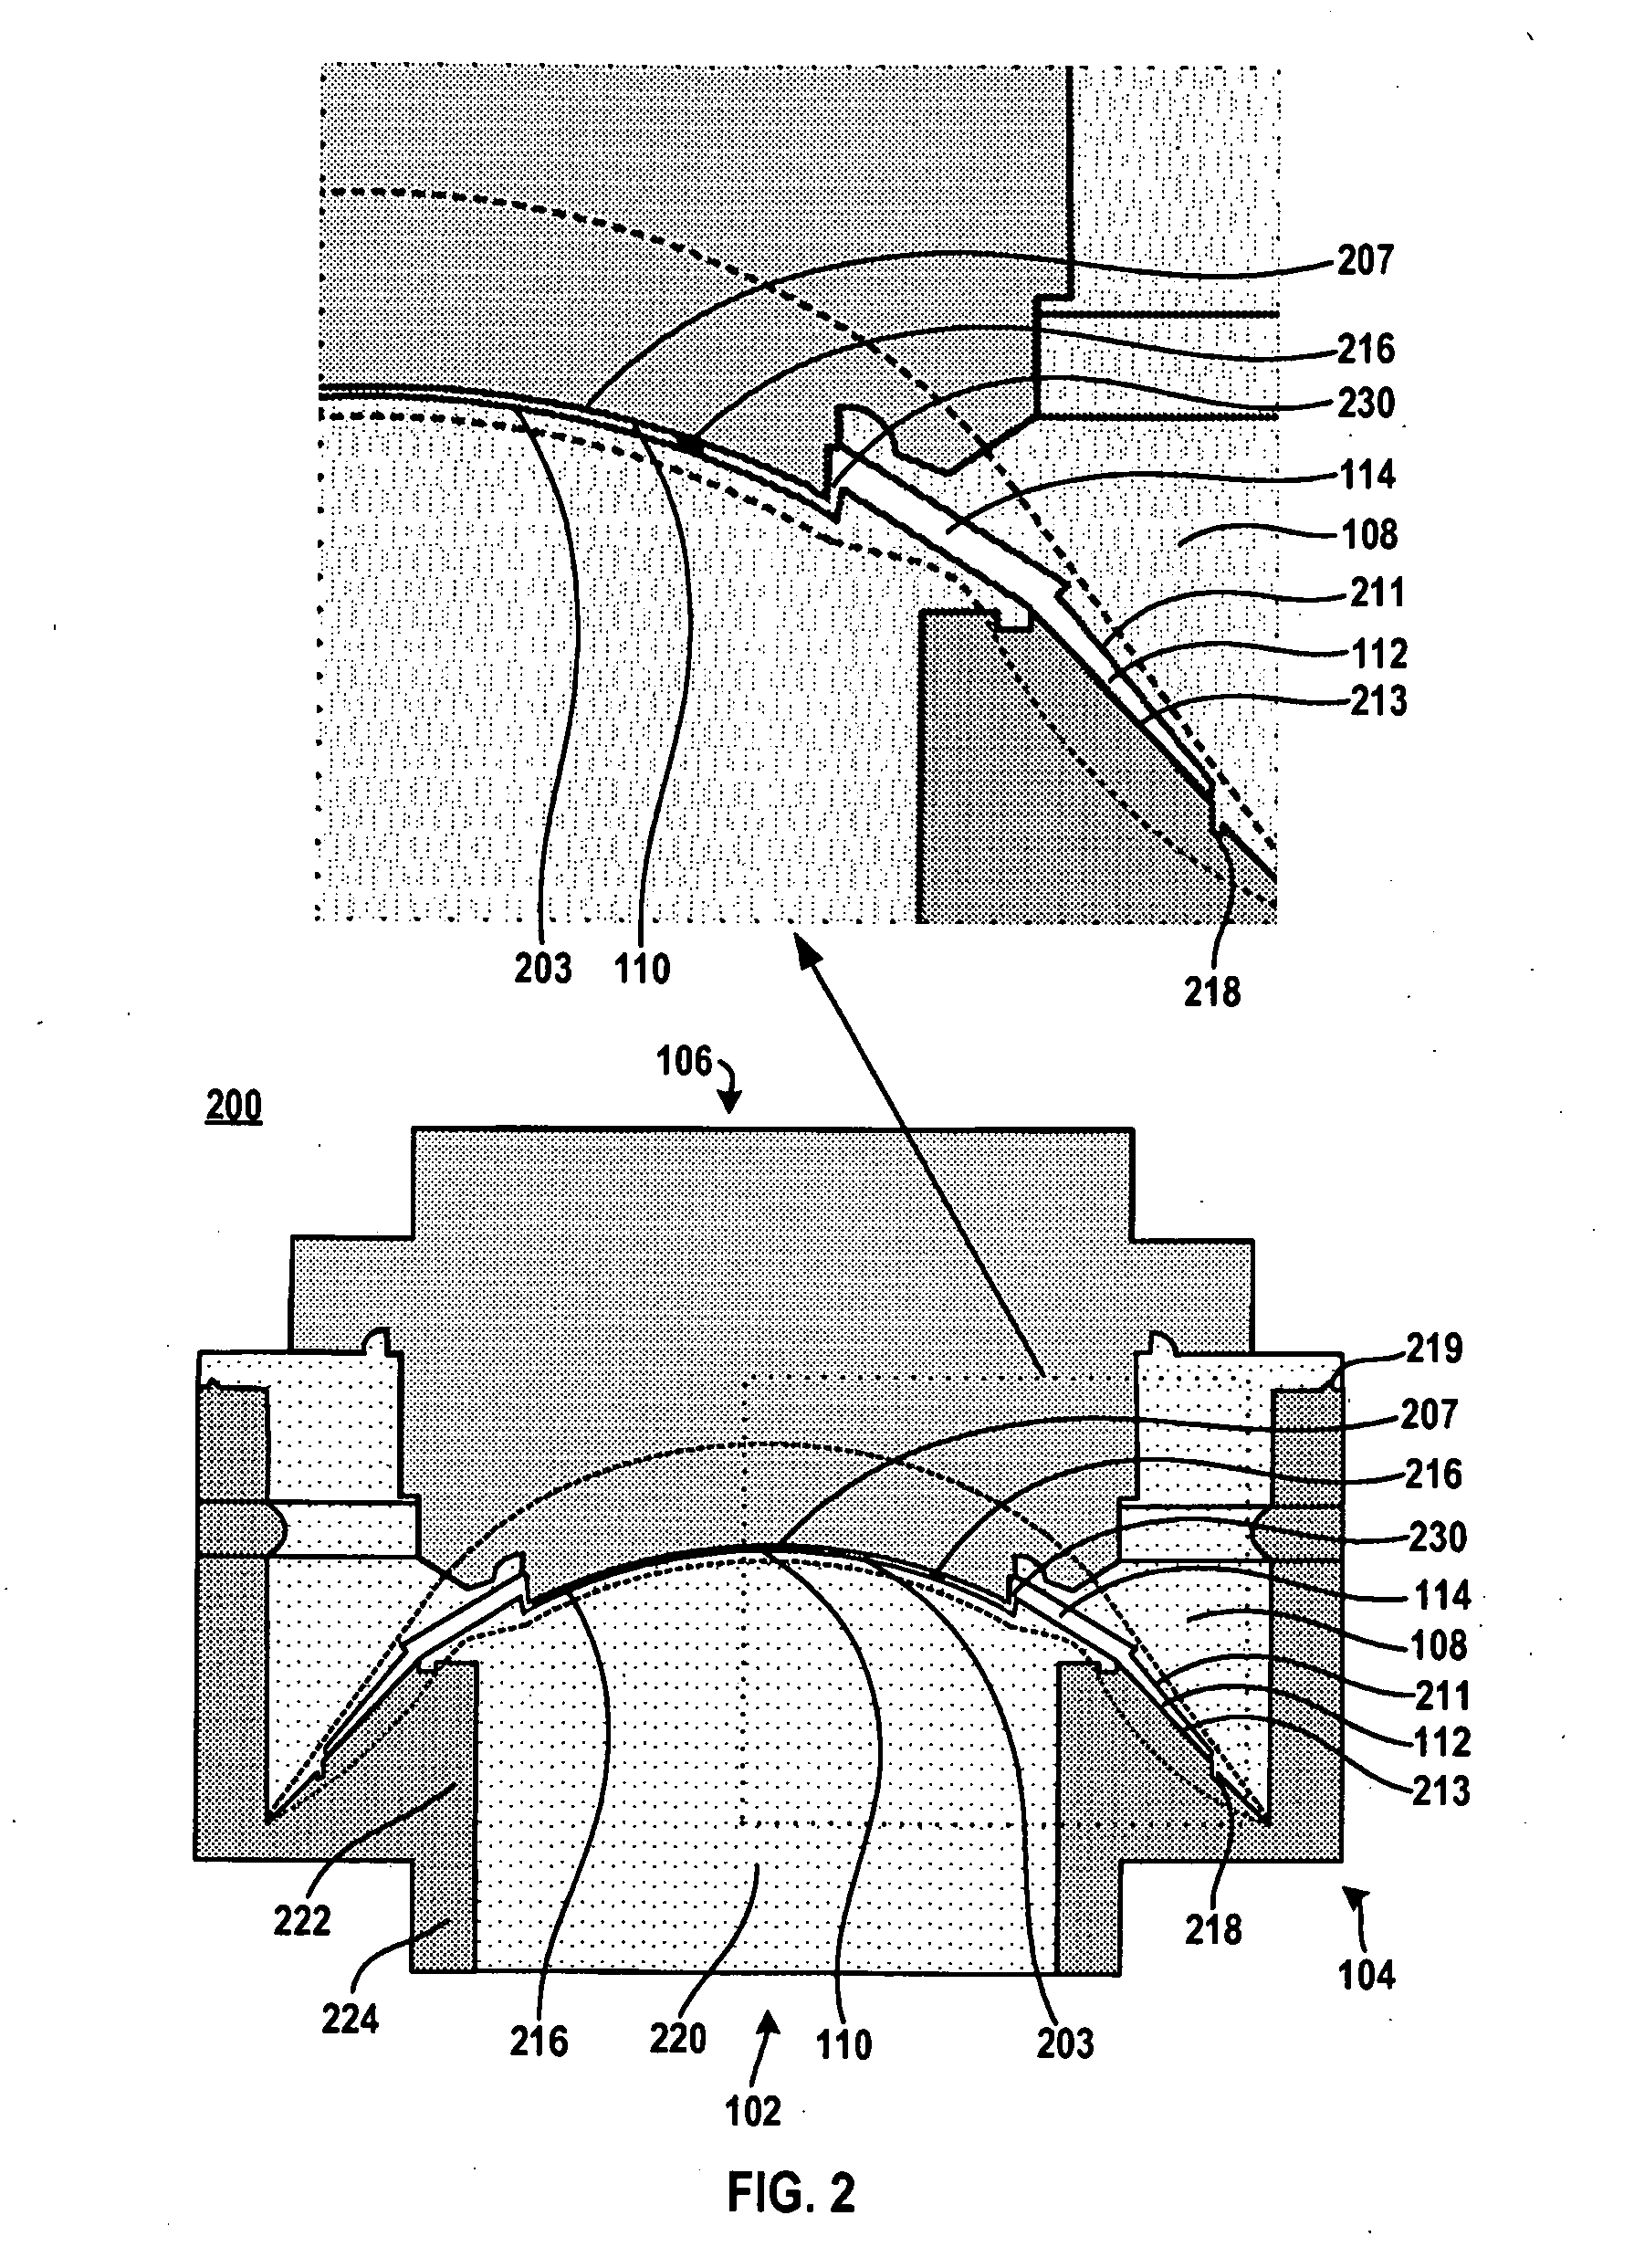 Multicomponent optical device having a space